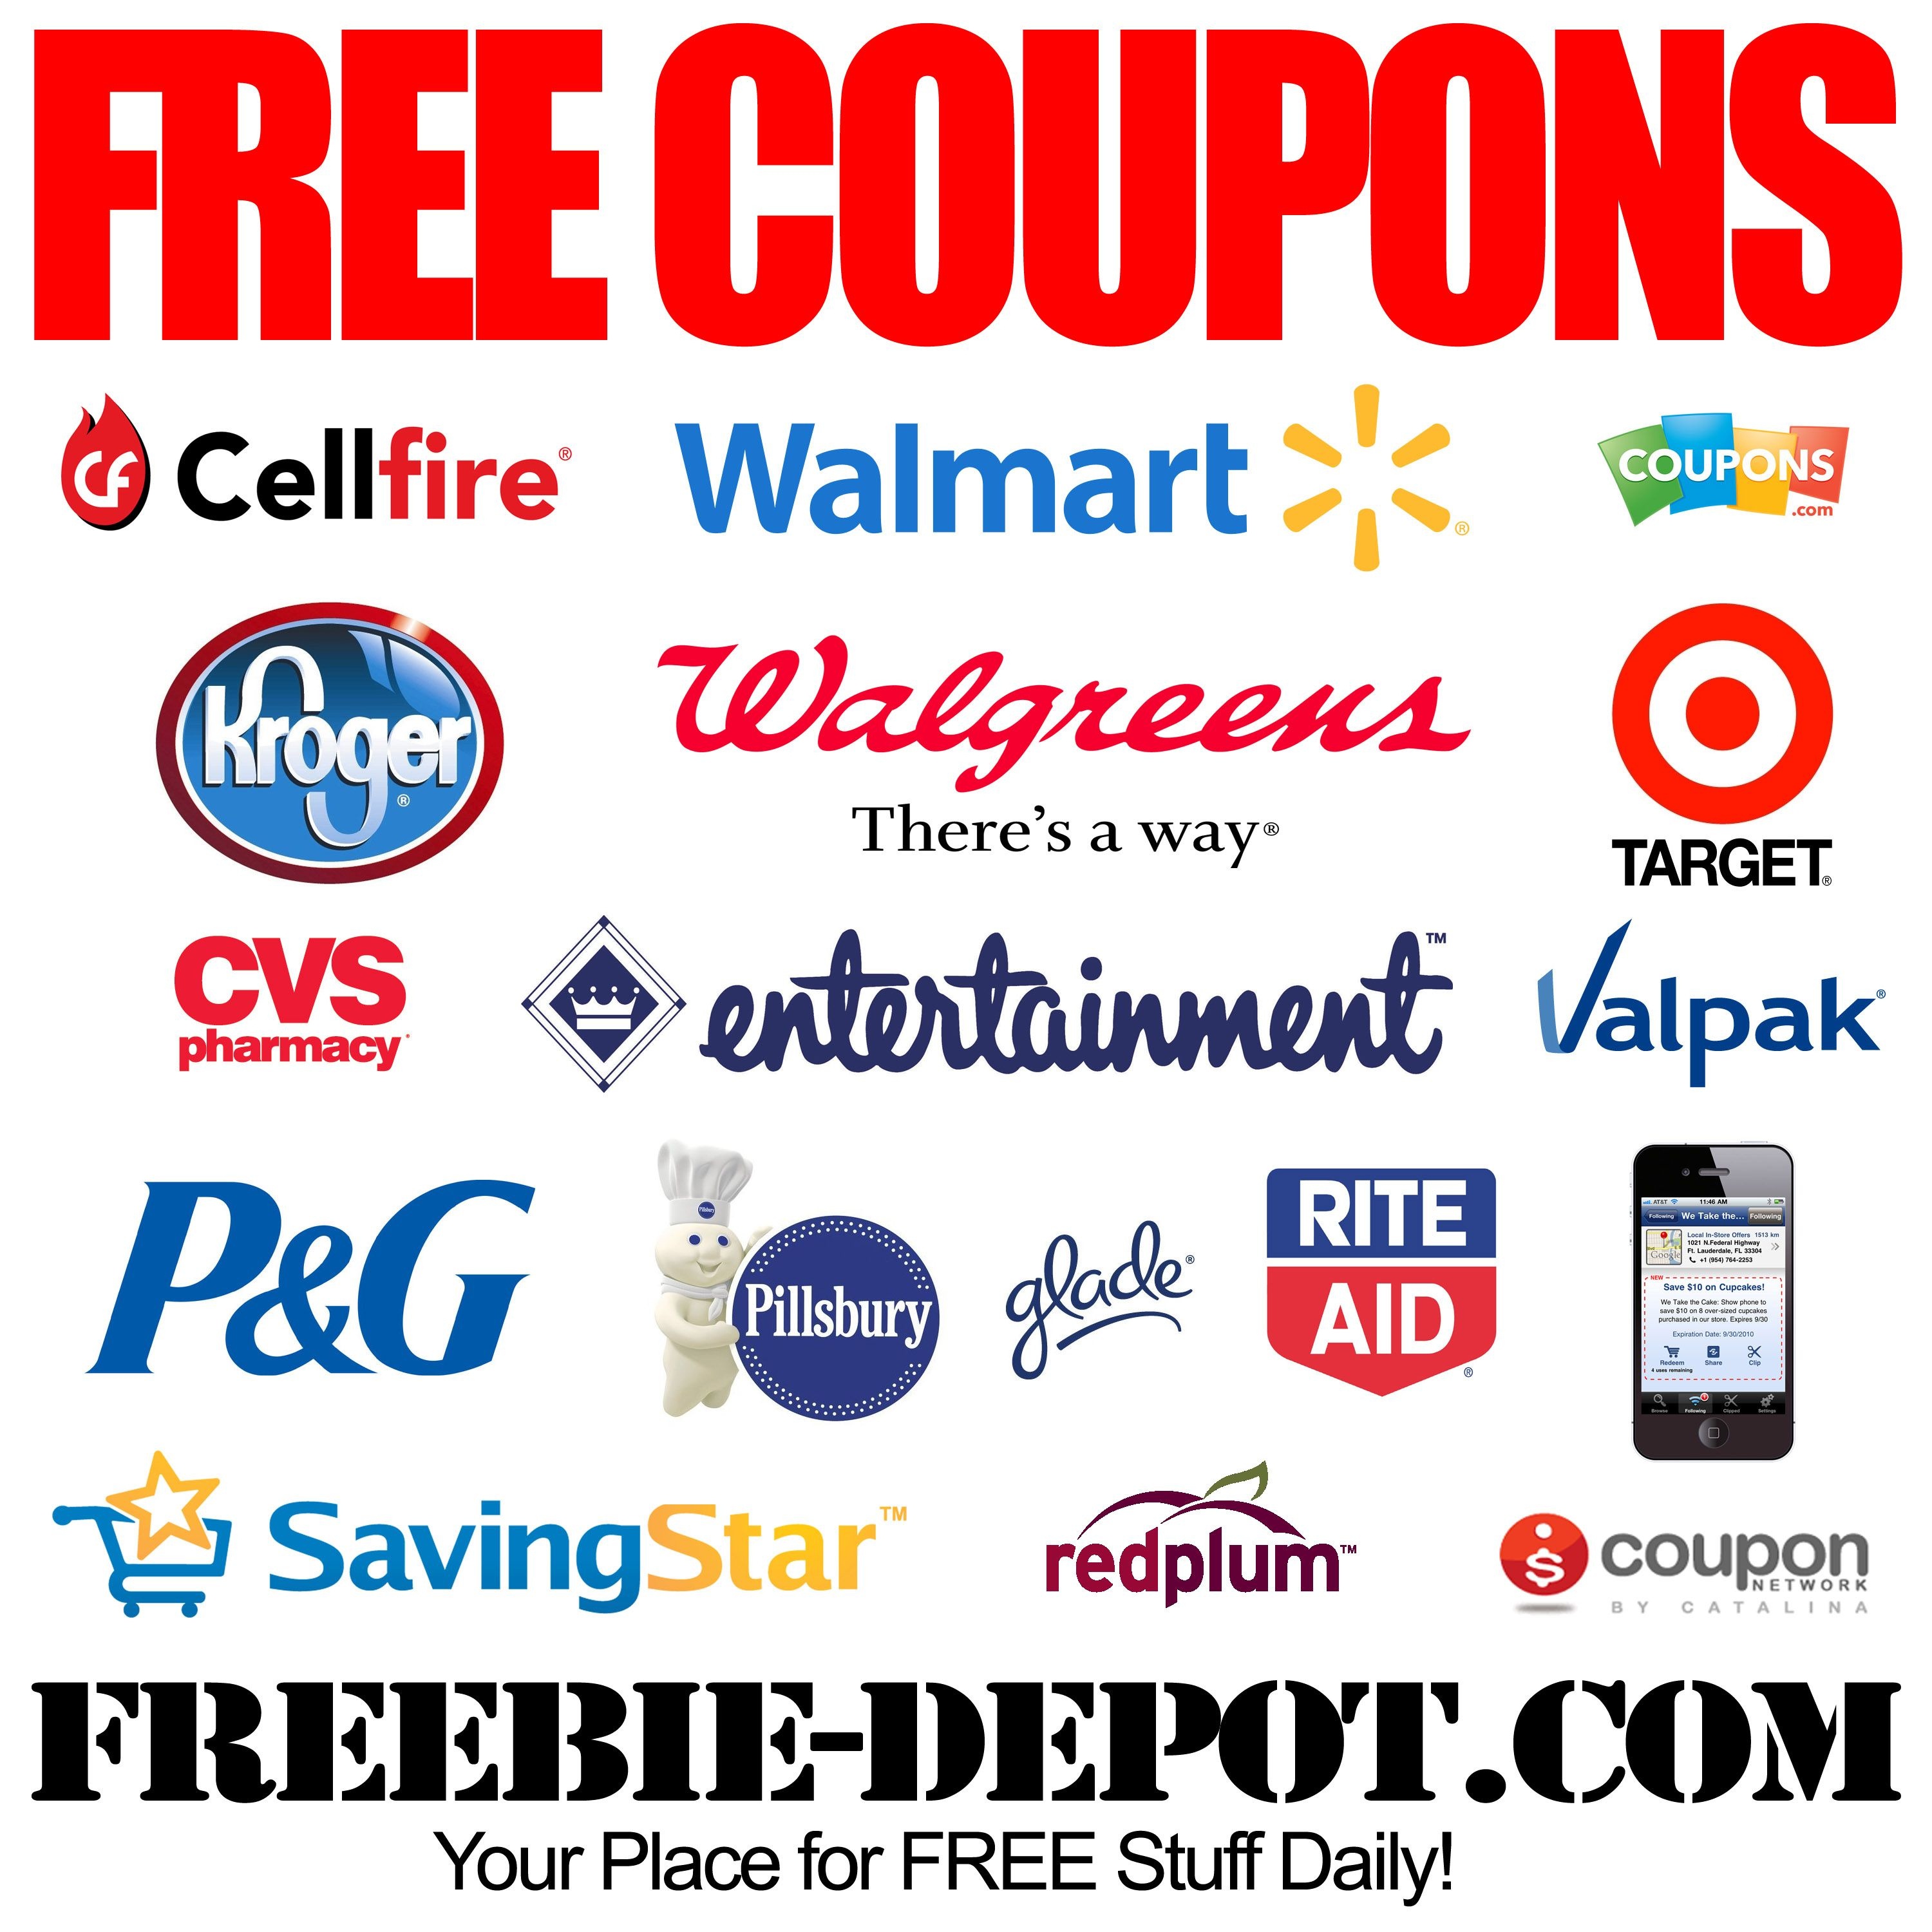 printable-couponsricky-martin-issuu-free-printable-coupons-without